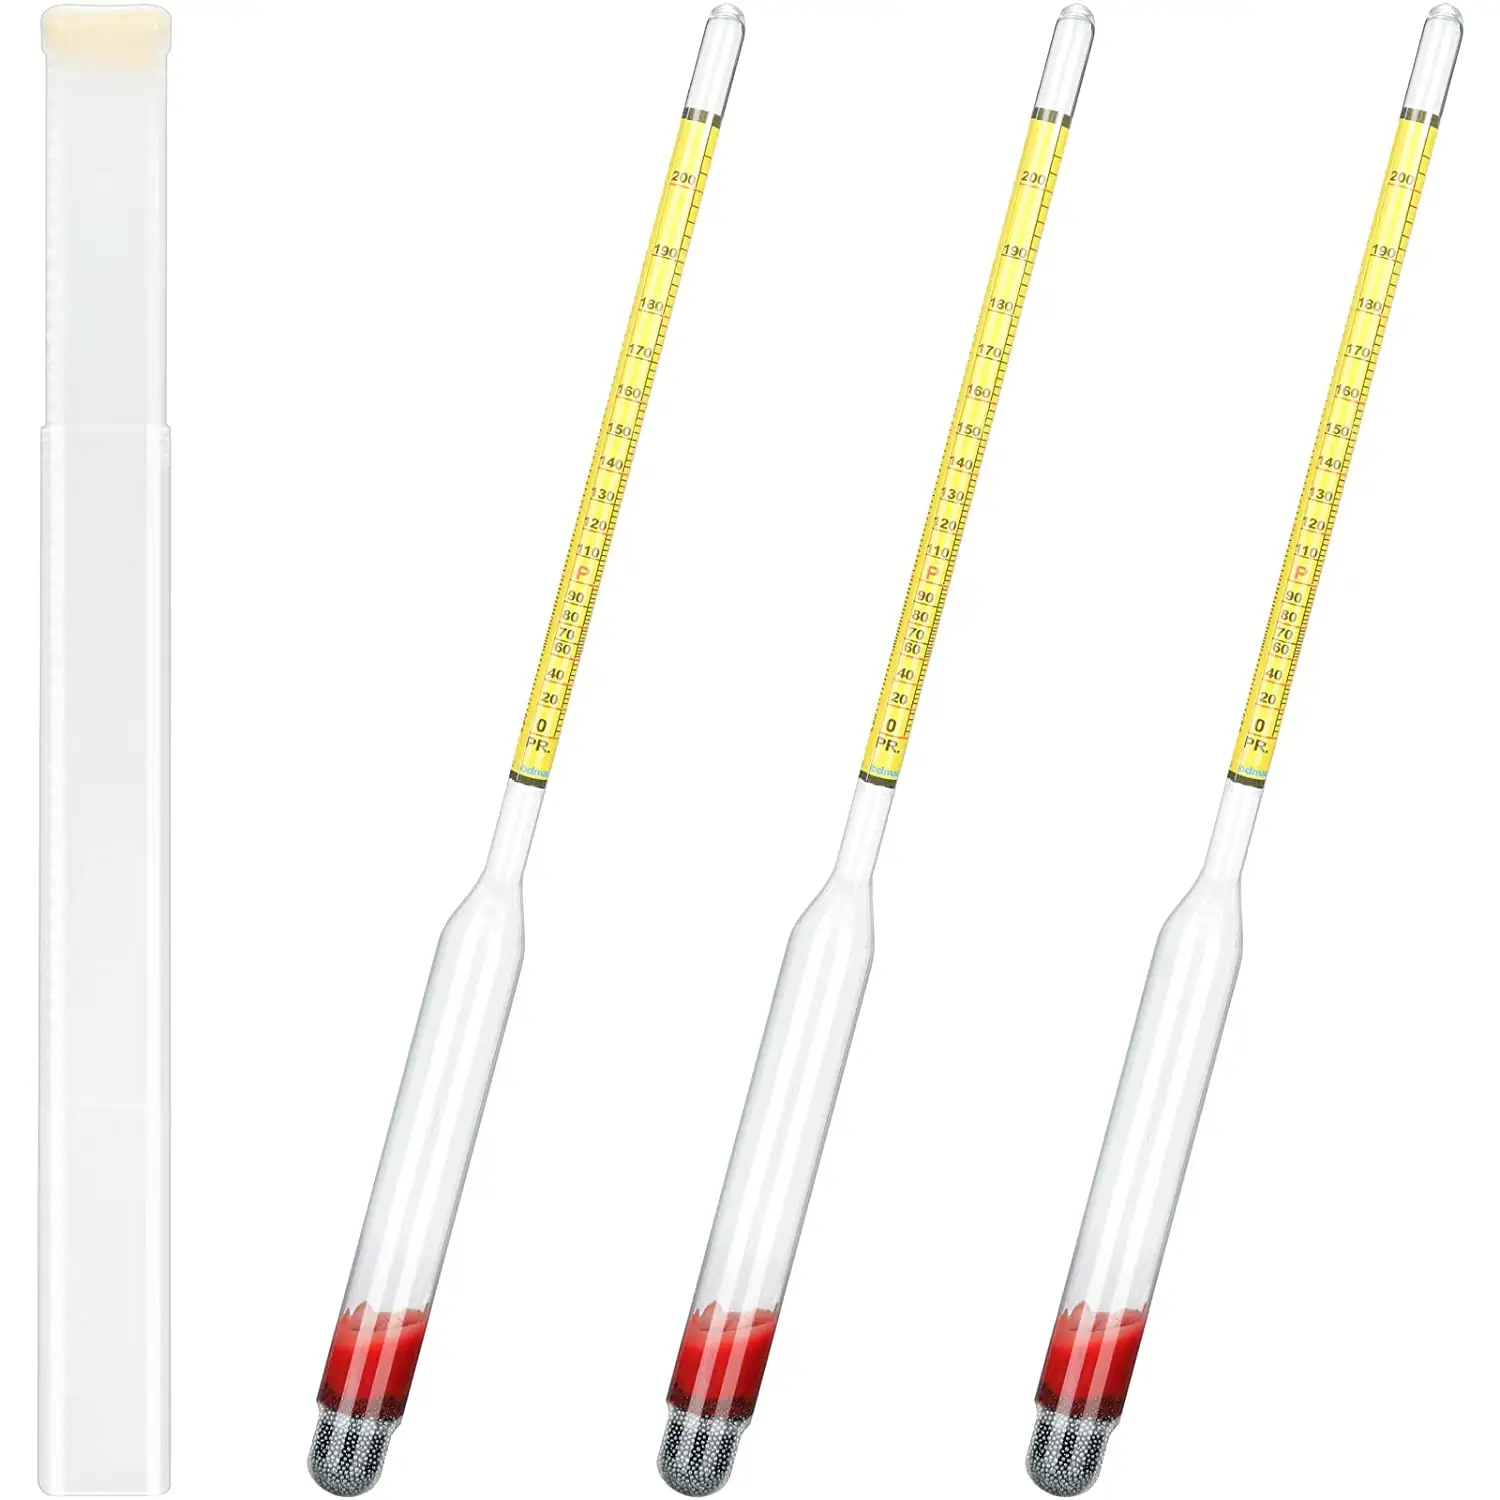 Alcoholmeter 0-200 Proof and 0-100 Tralle Alcohol Tester Hydrometer Glass Alcohol Measuring Alcohol hydrometer